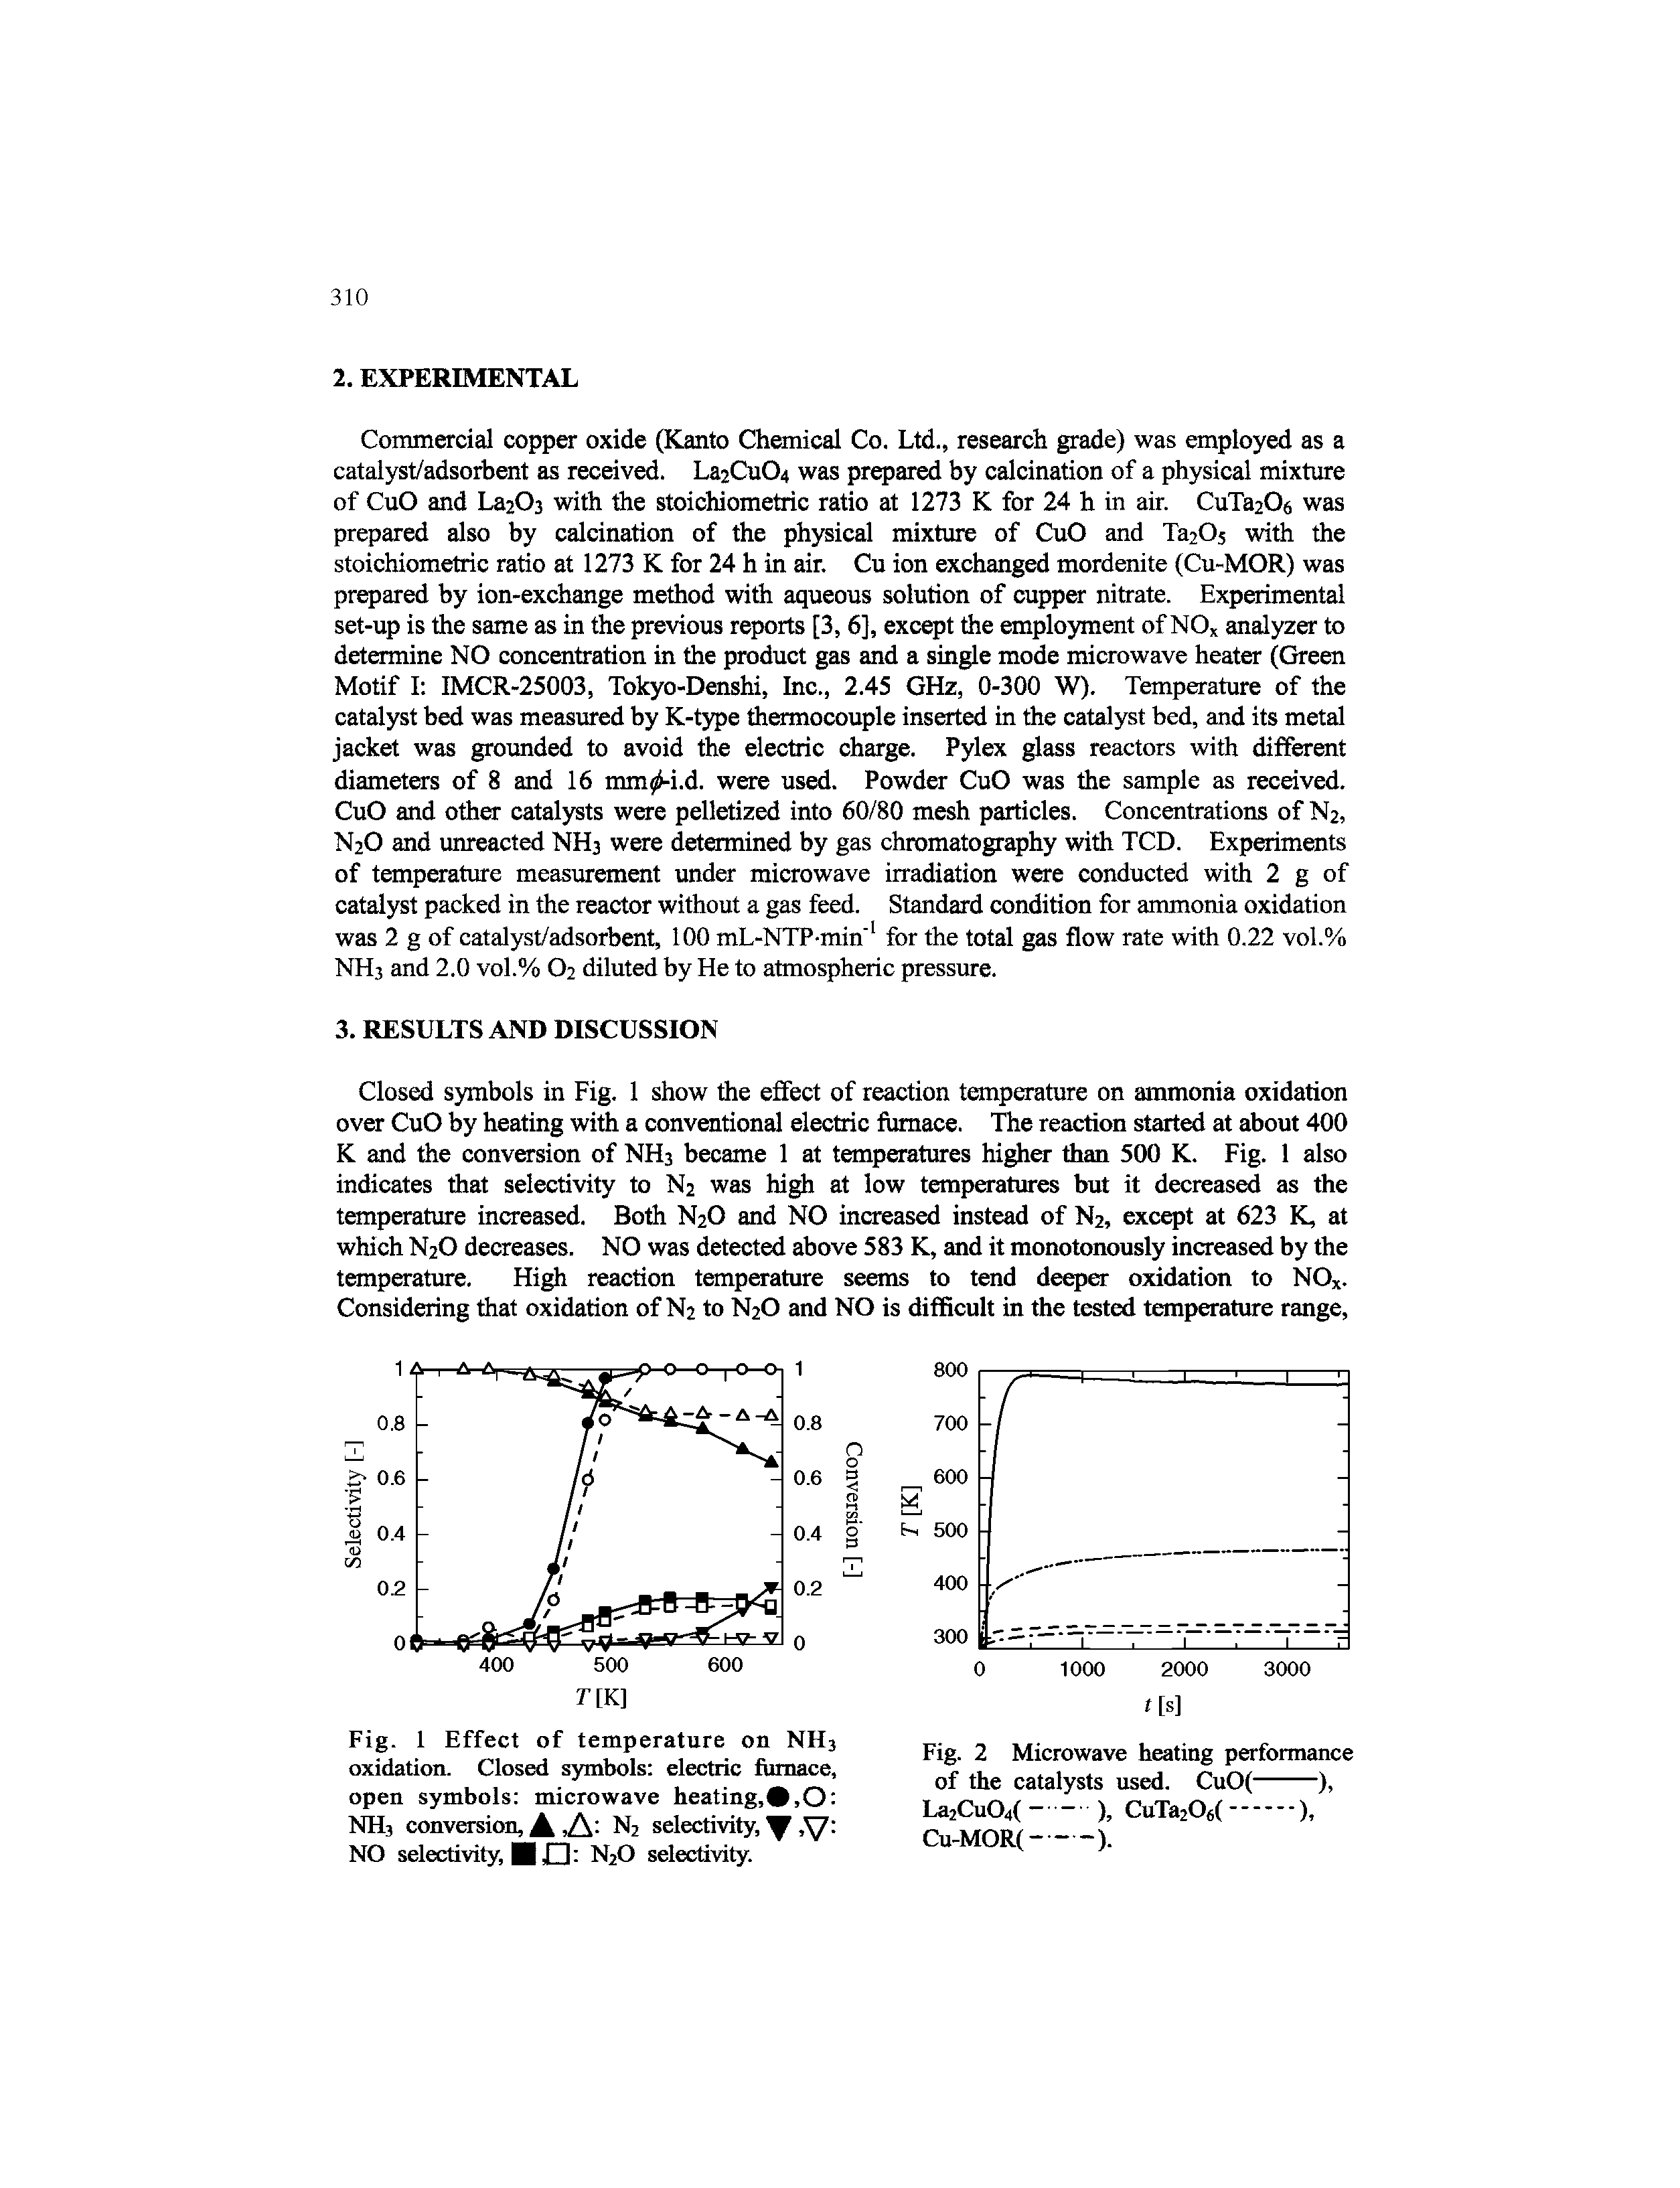 Fig. 1 Effect of temperature on NH3 oxidation. Closed symbols electric finnace, open symbols microwave heating,, O NH3 conversion, A, A N2 selectivity,, NO selectivity, BO N2O selectivity.